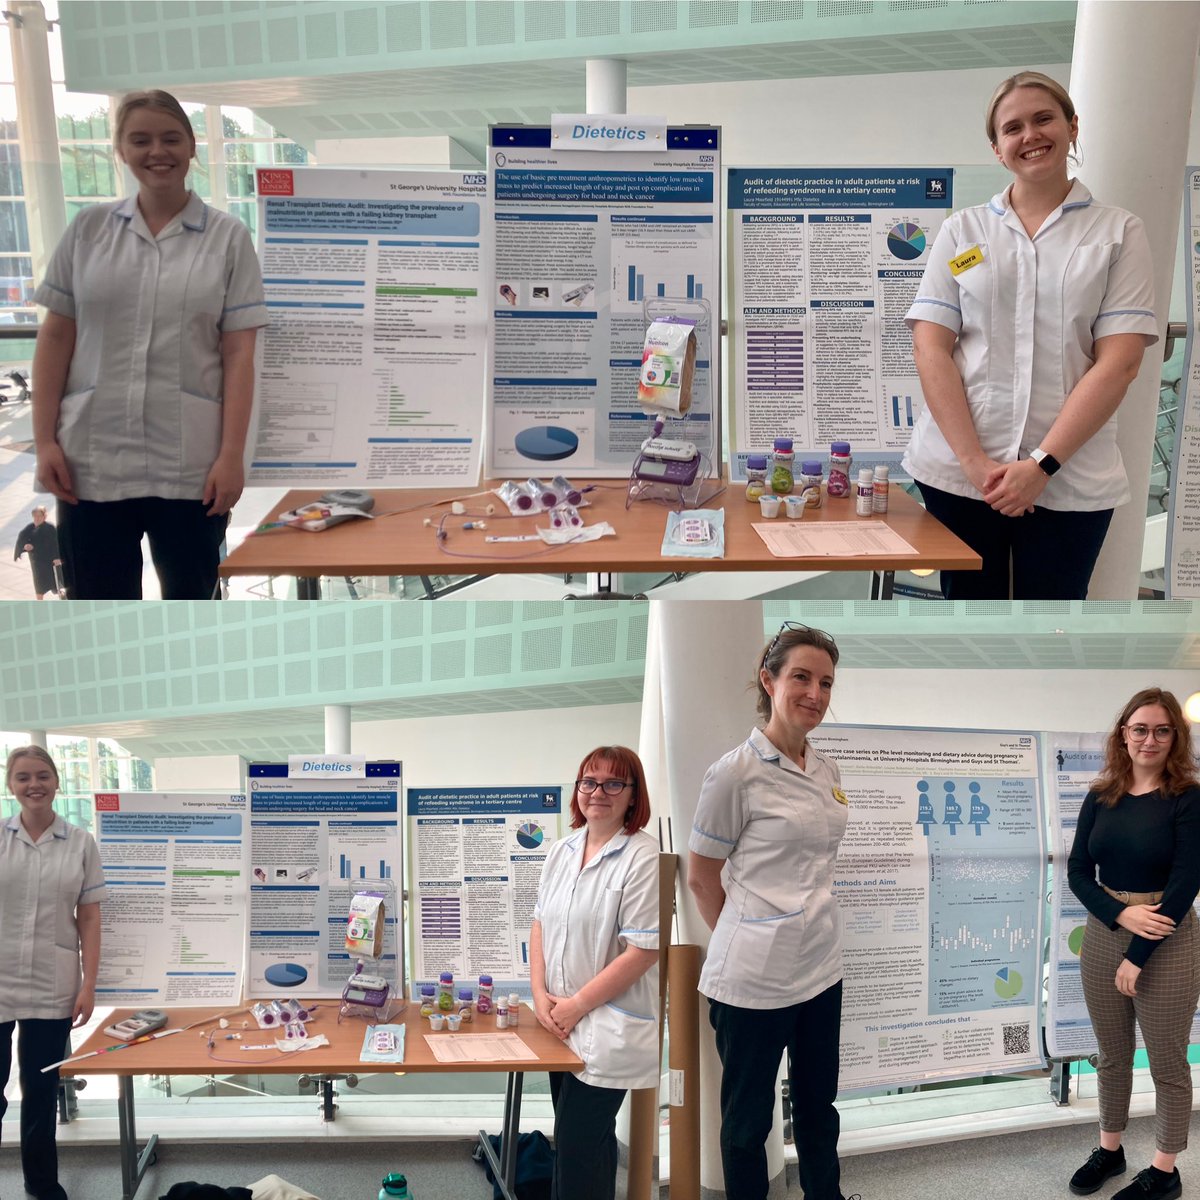 Great start to #AHPday ⁦@uhbtrust⁩. Fantastic to see what our dietitians have been up to this year. ⁦@UHBTherapy⁩ ⁦@louisedietitian⁩